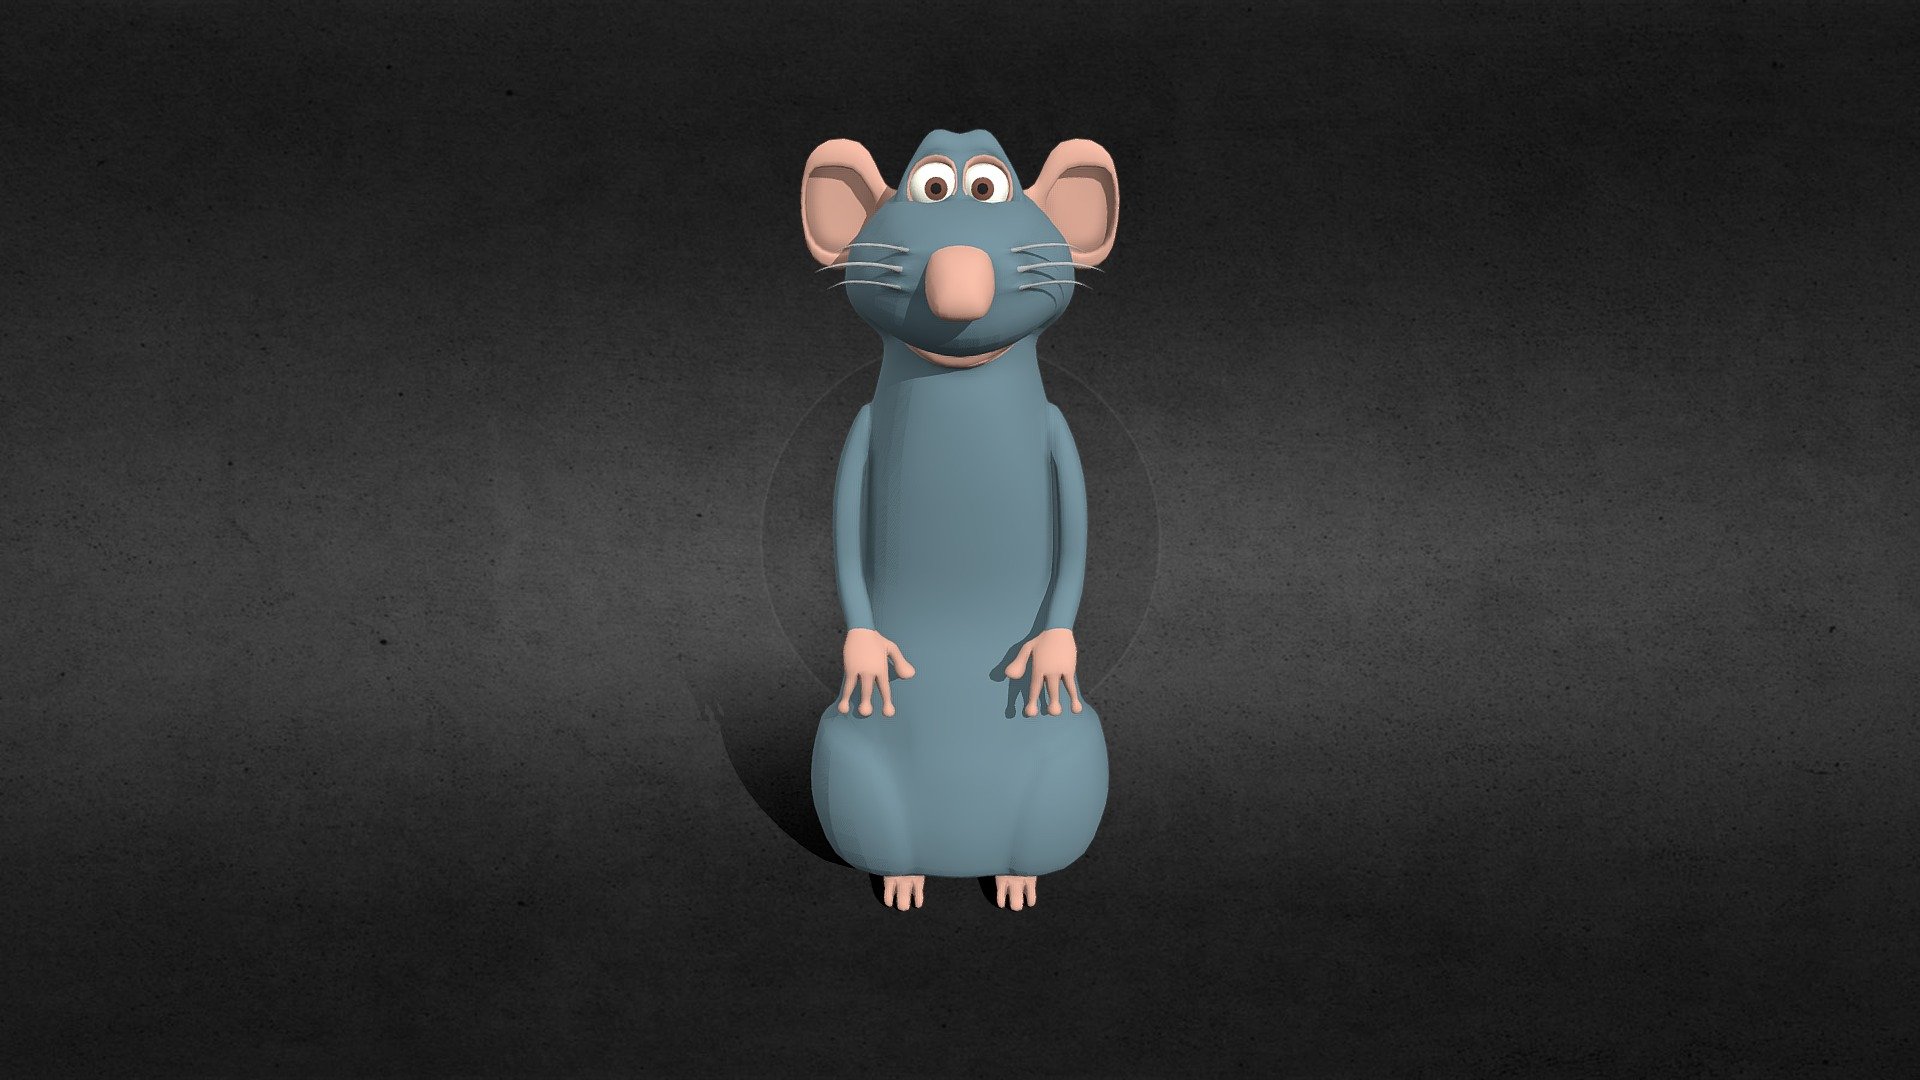 Complete 3D modelling from Disney's Pixar &lsquo;Ratatouille'. The model is not rigged nor animated.
Roughly 16/17 hours of work.

Enjoy! - Remy, (Disney's Pixar Ratatouille) - Download Free 3D model by elvinguhl 3d model